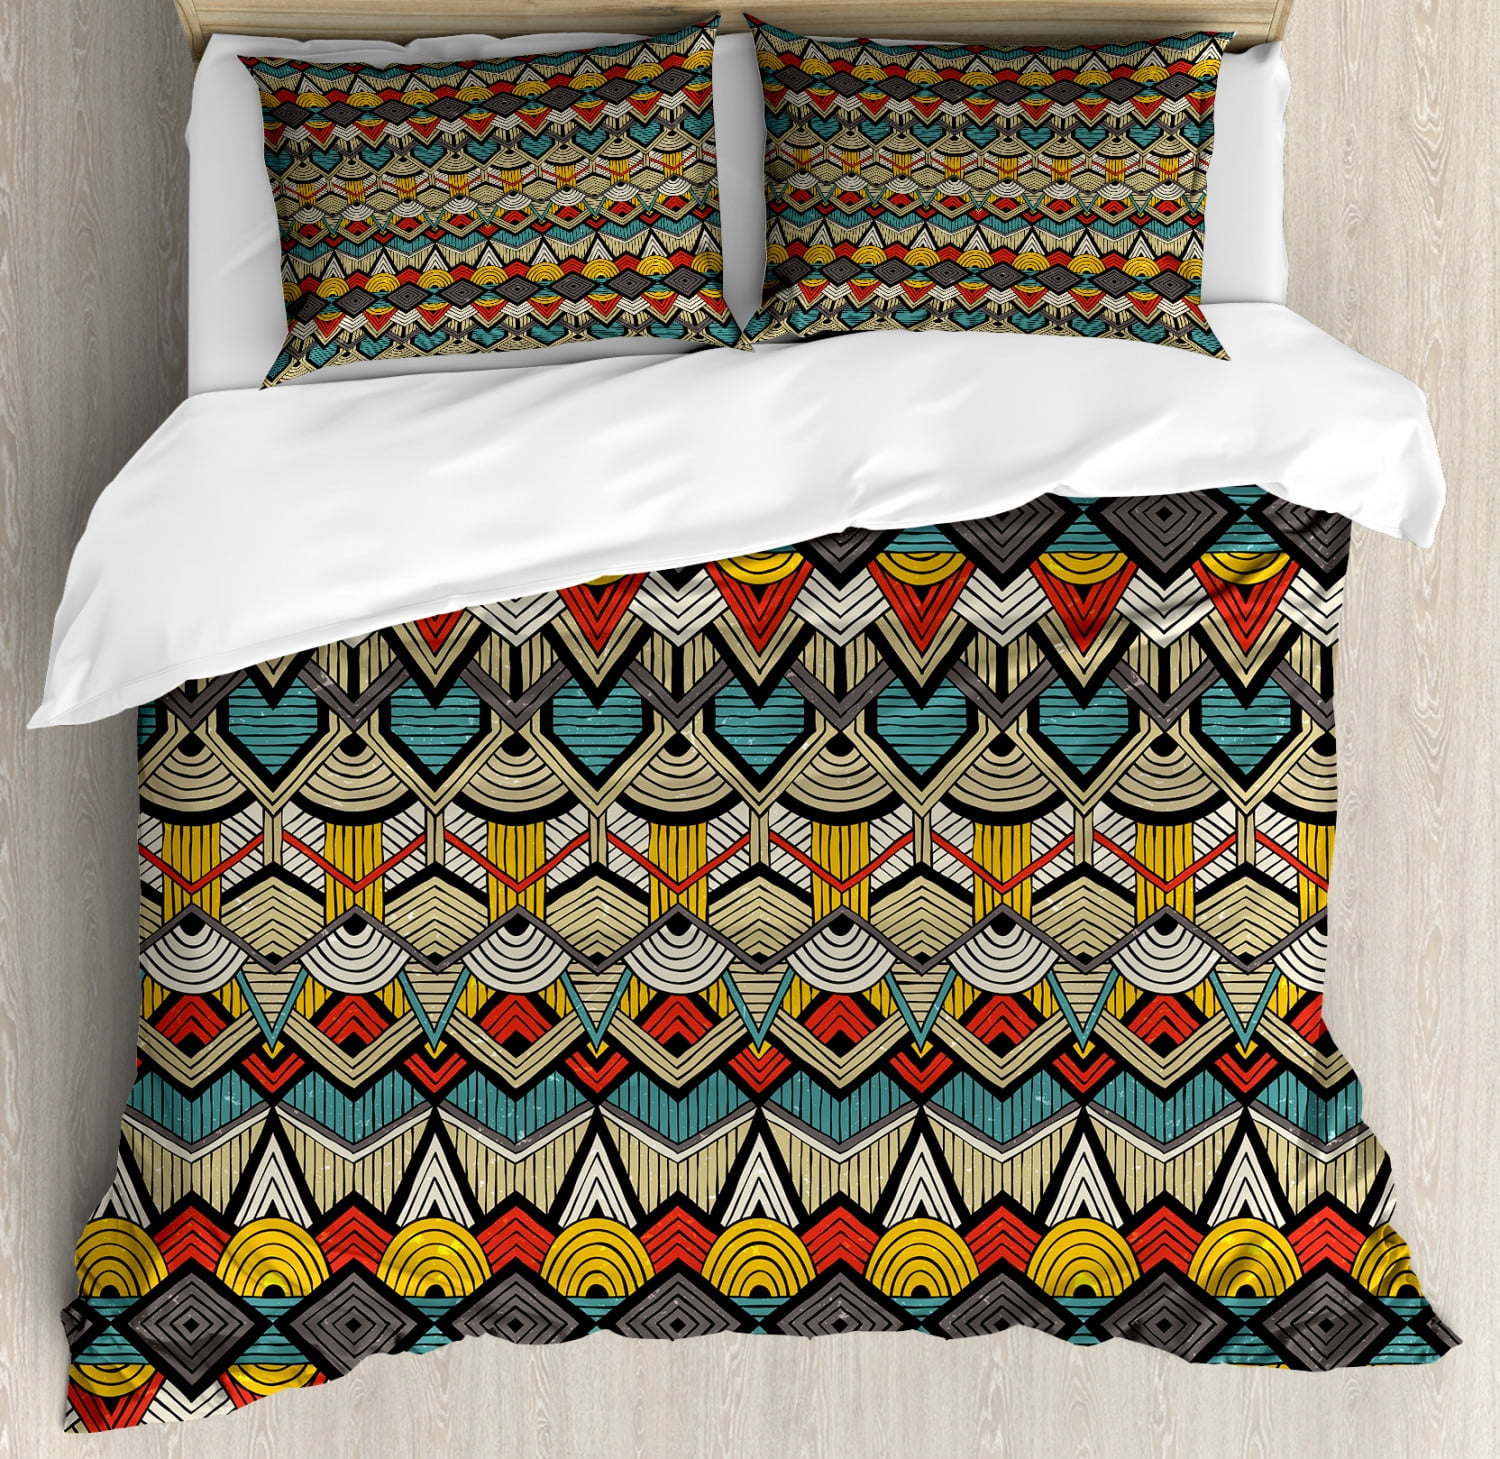 Details about   African Woman Pillow Sham Decorative Pillowcase 3 Sizes Bedroom Decor Ambesonne 